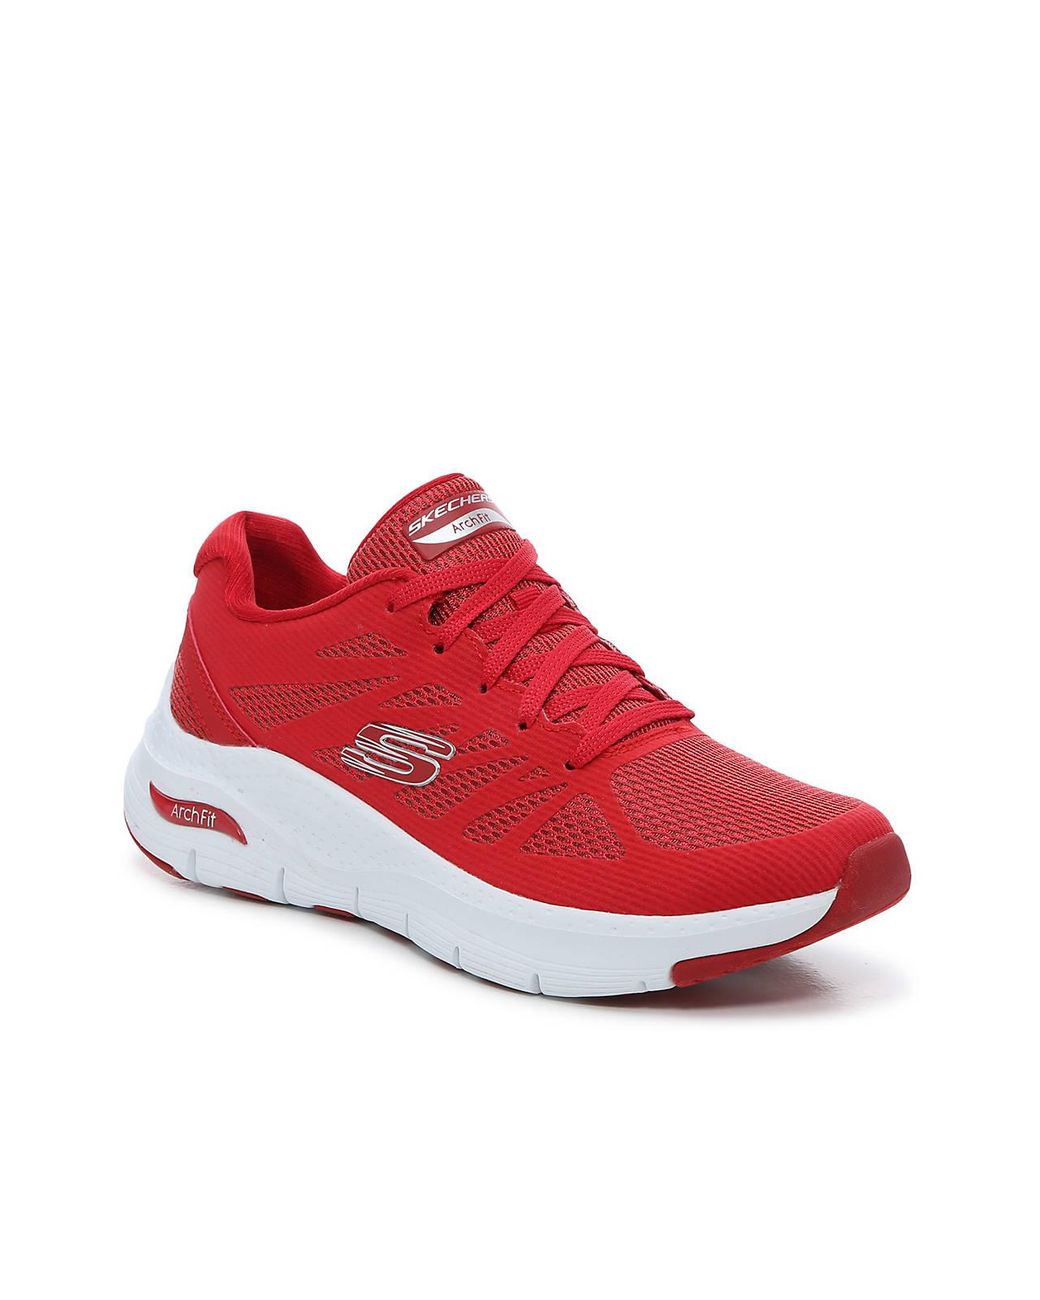 Skechers Synthetic Arch Fit Sneaker in Red - Lyst